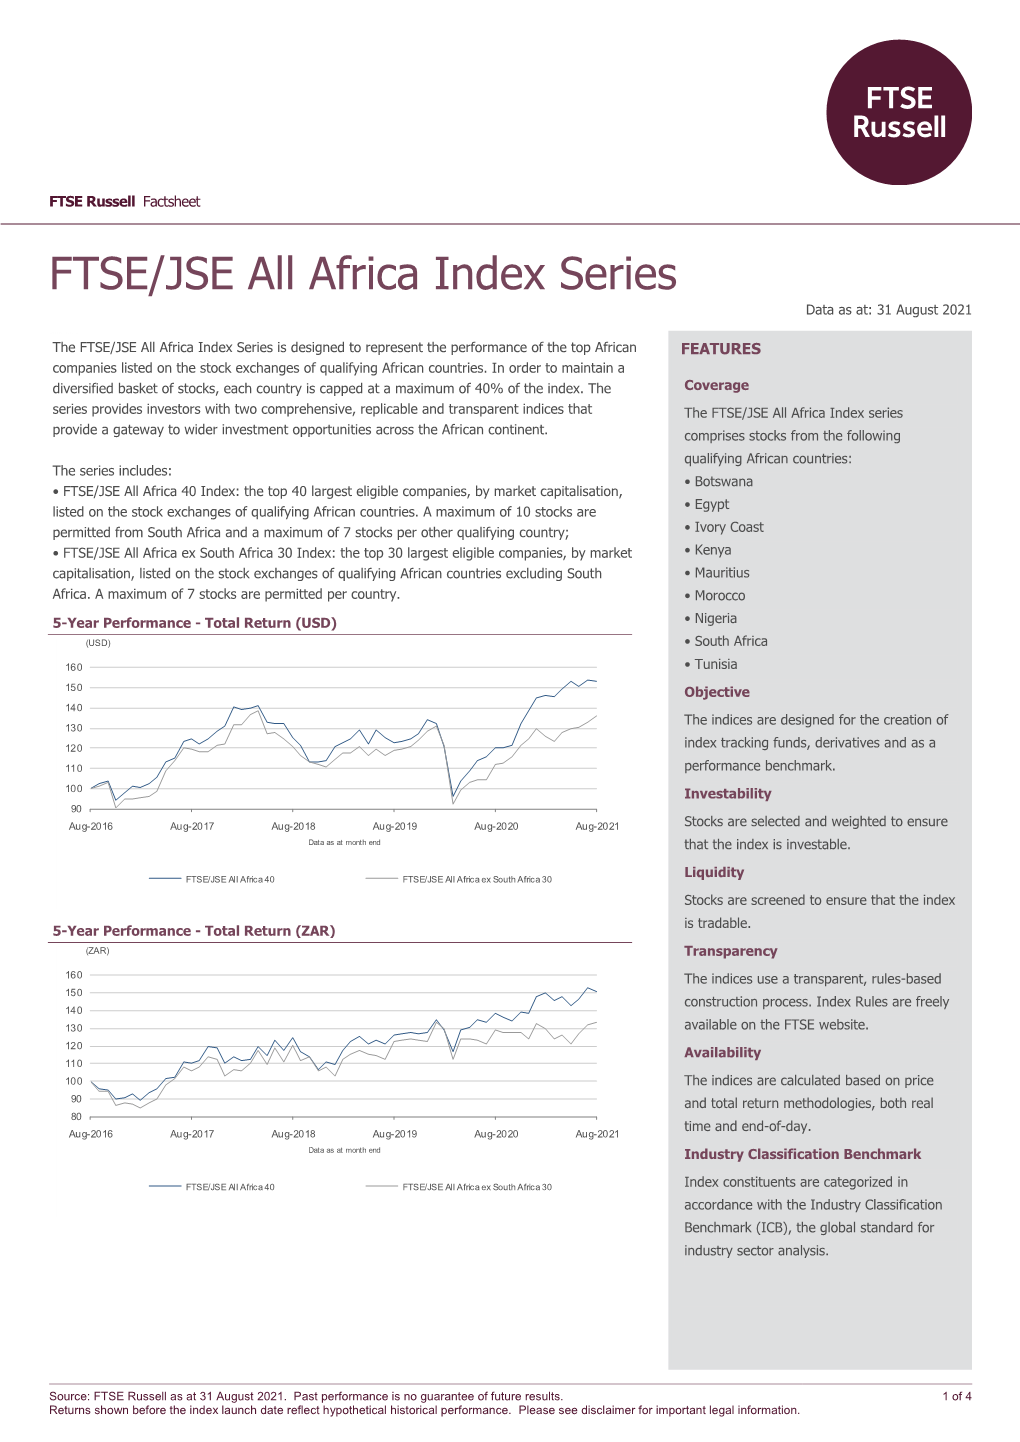 FTSE/JSE All Africa Index Series